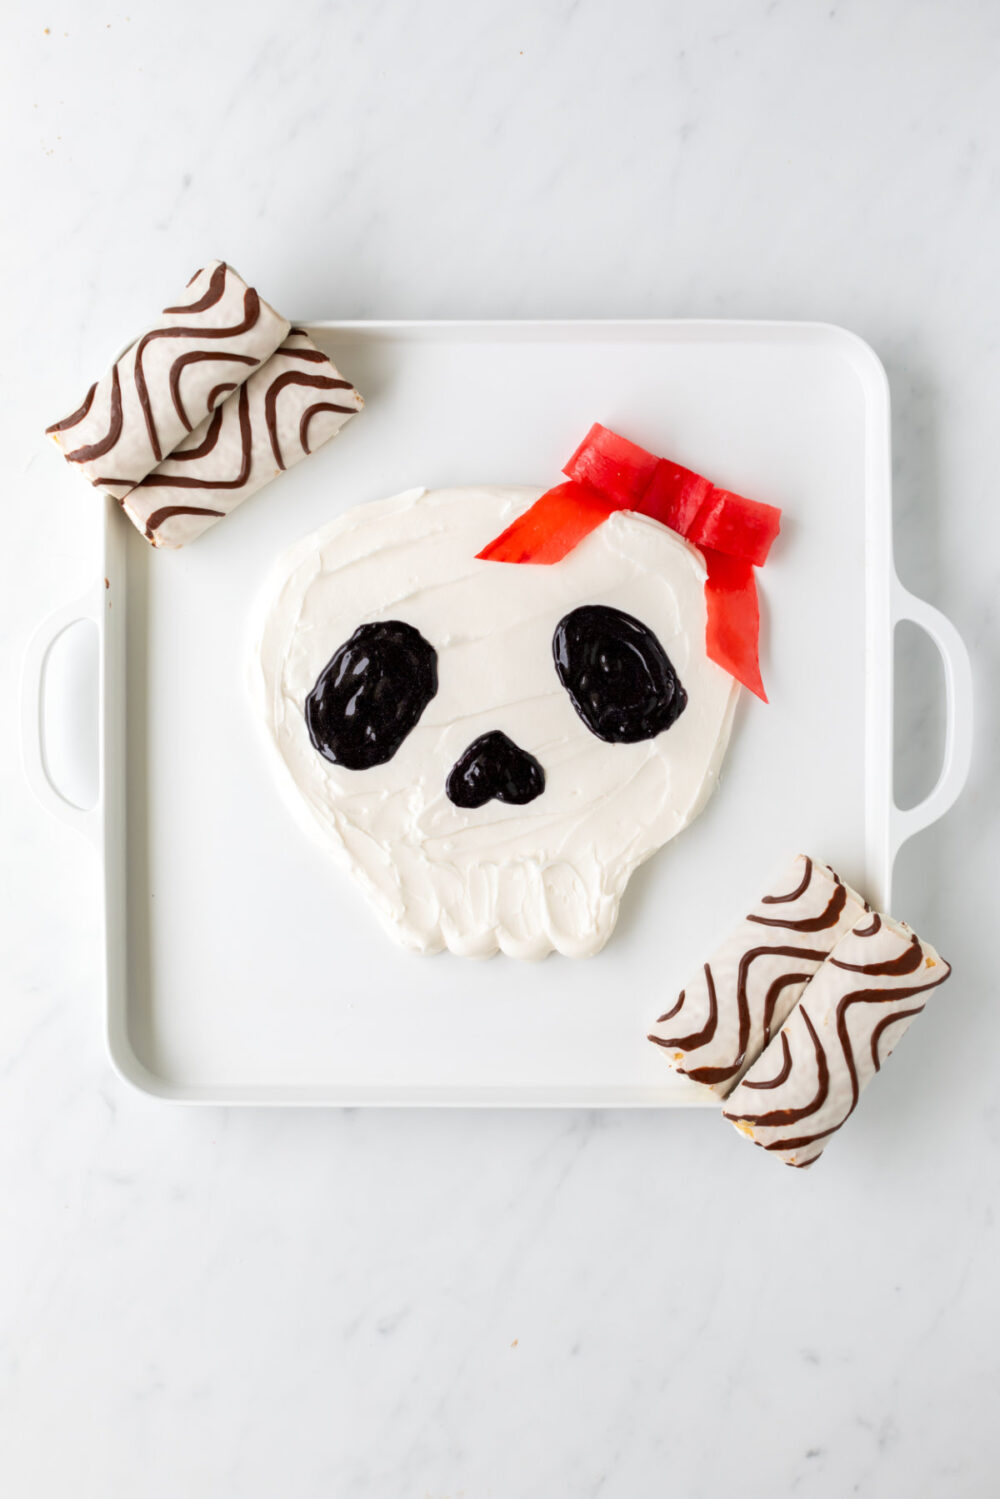 Zebra cakes at the corners of the frosting skull board. 